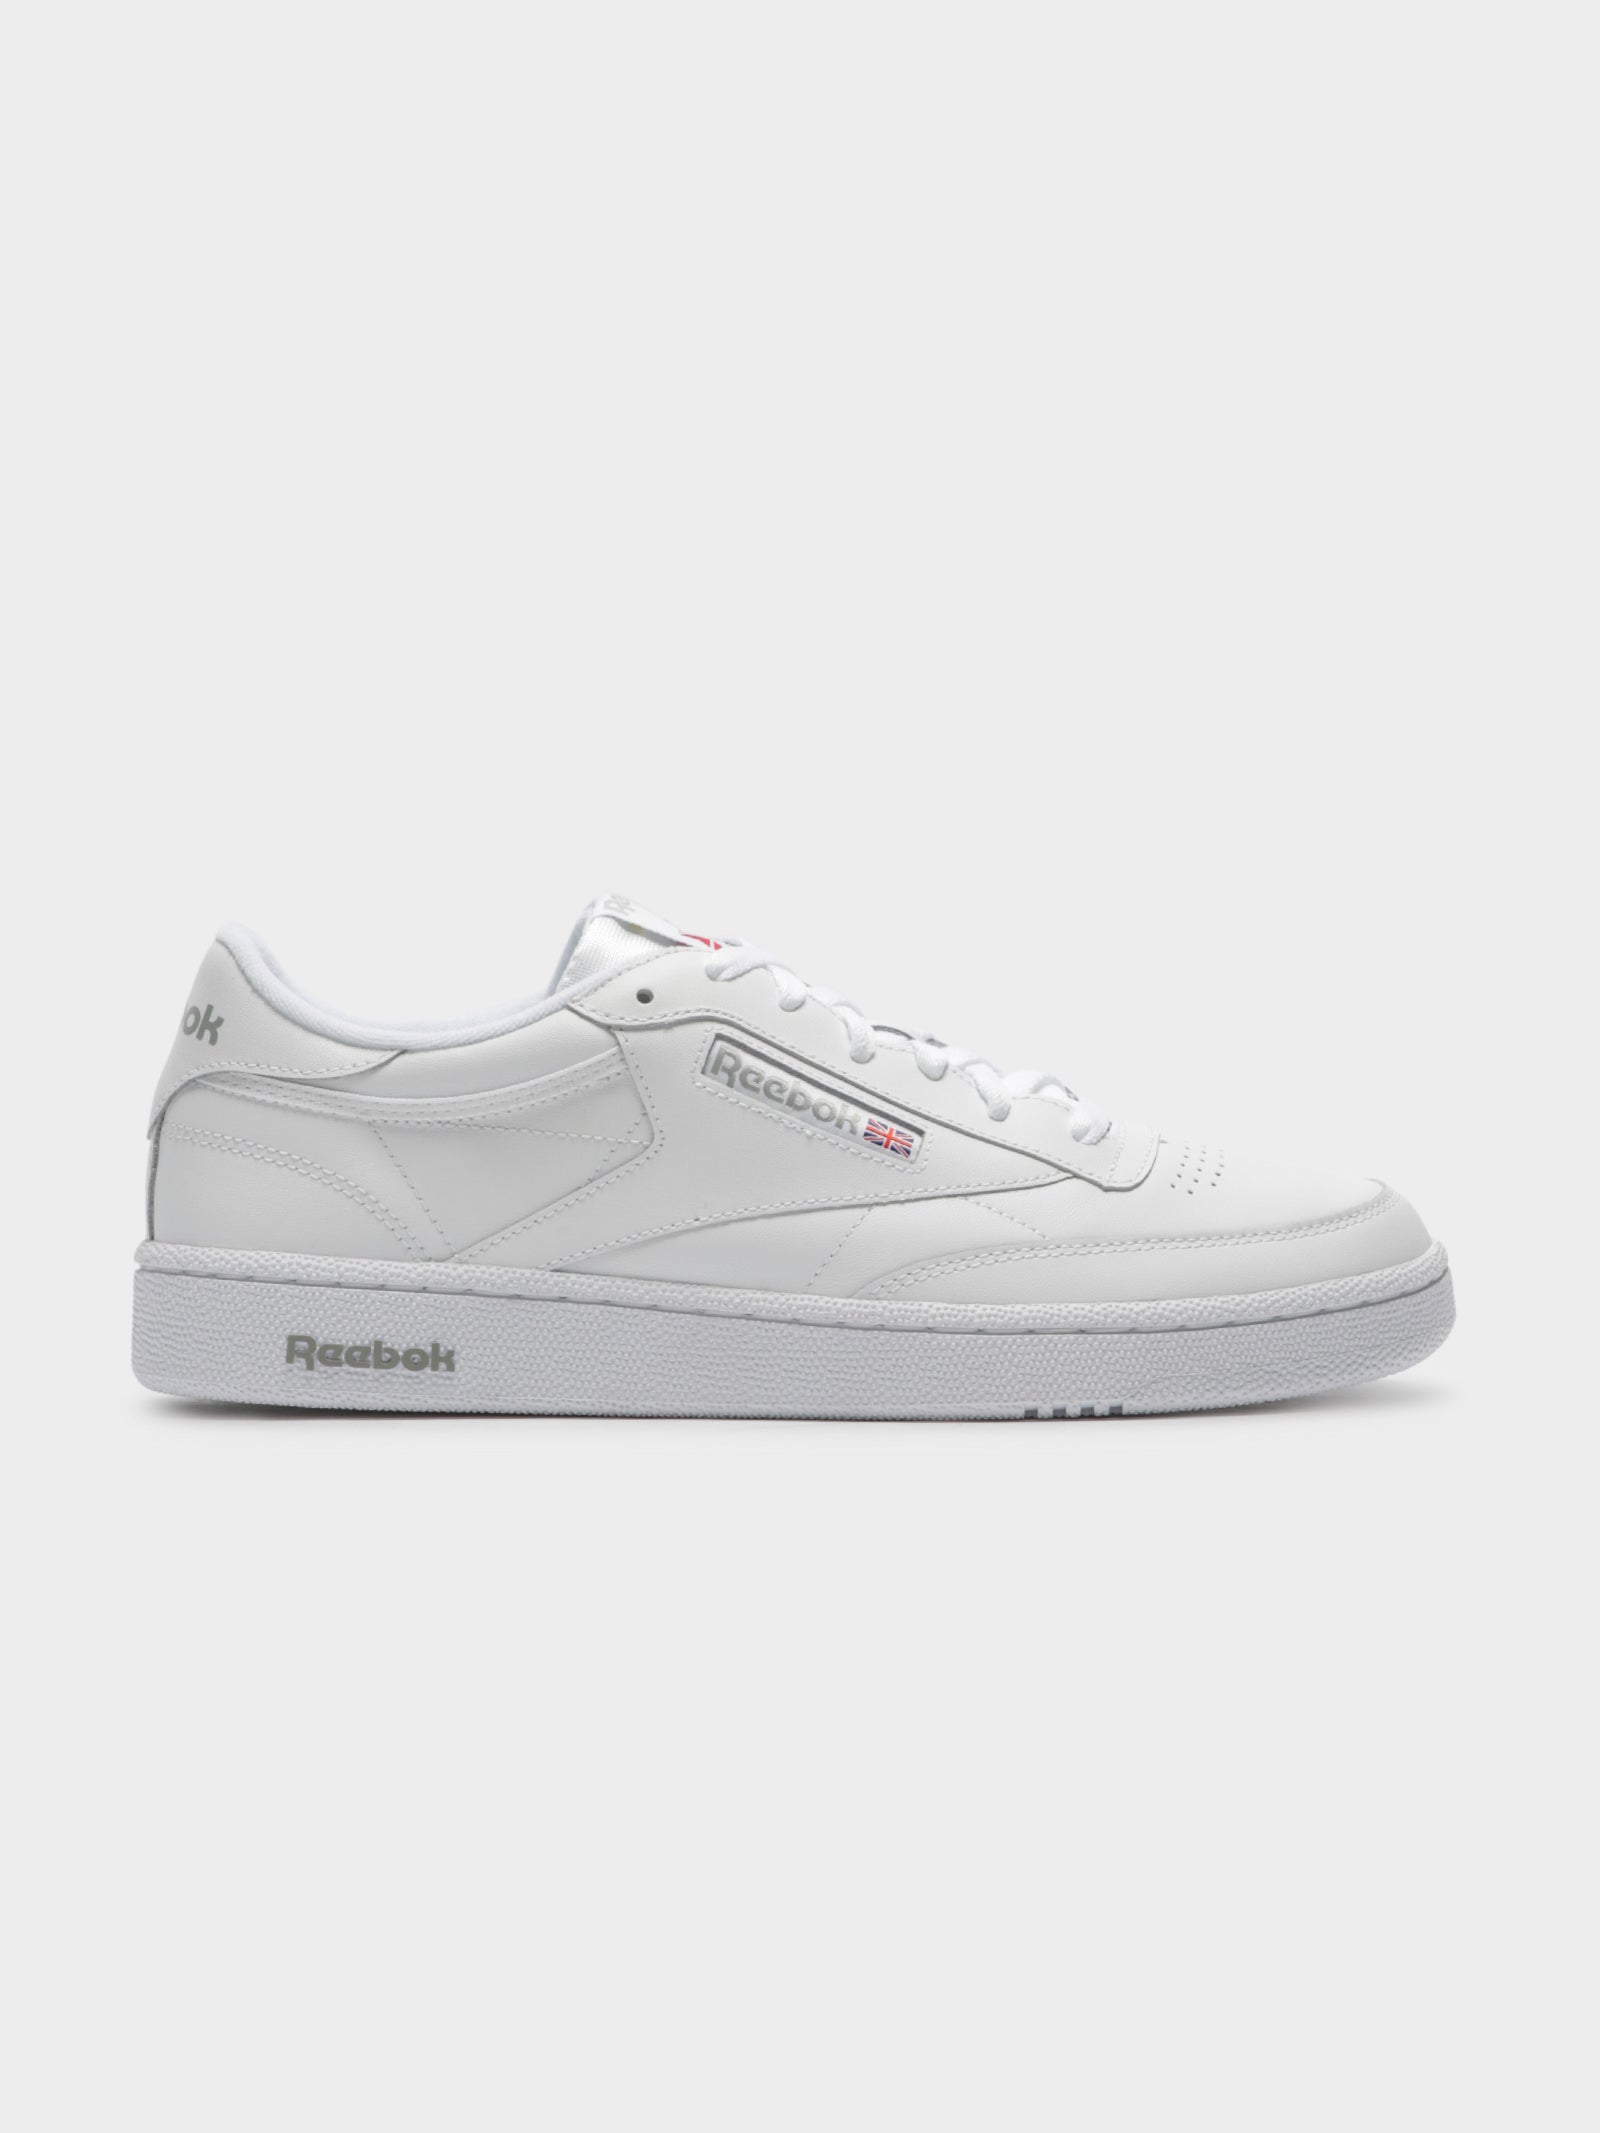 Unisex Club C 85 Sneakers in White & Grey Leather